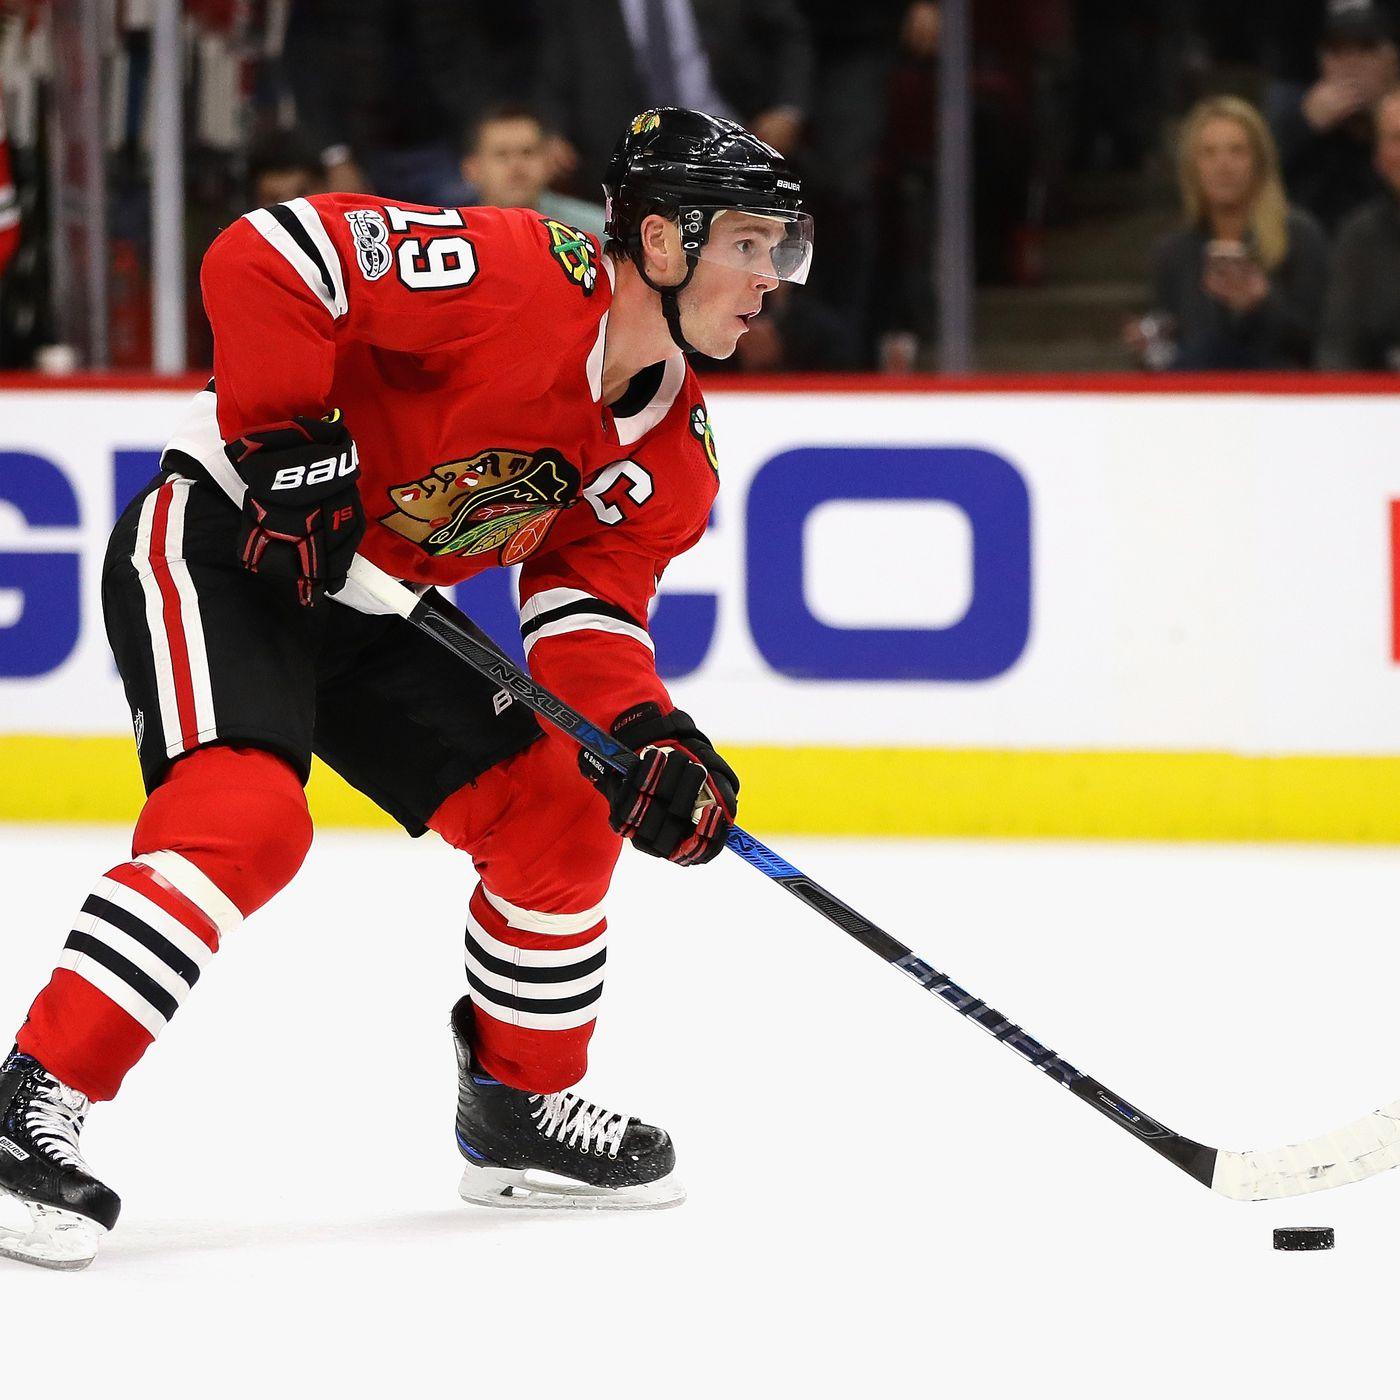 Jonathan Toews Is NHL's Highest Paid Player For 2nd Straight Year